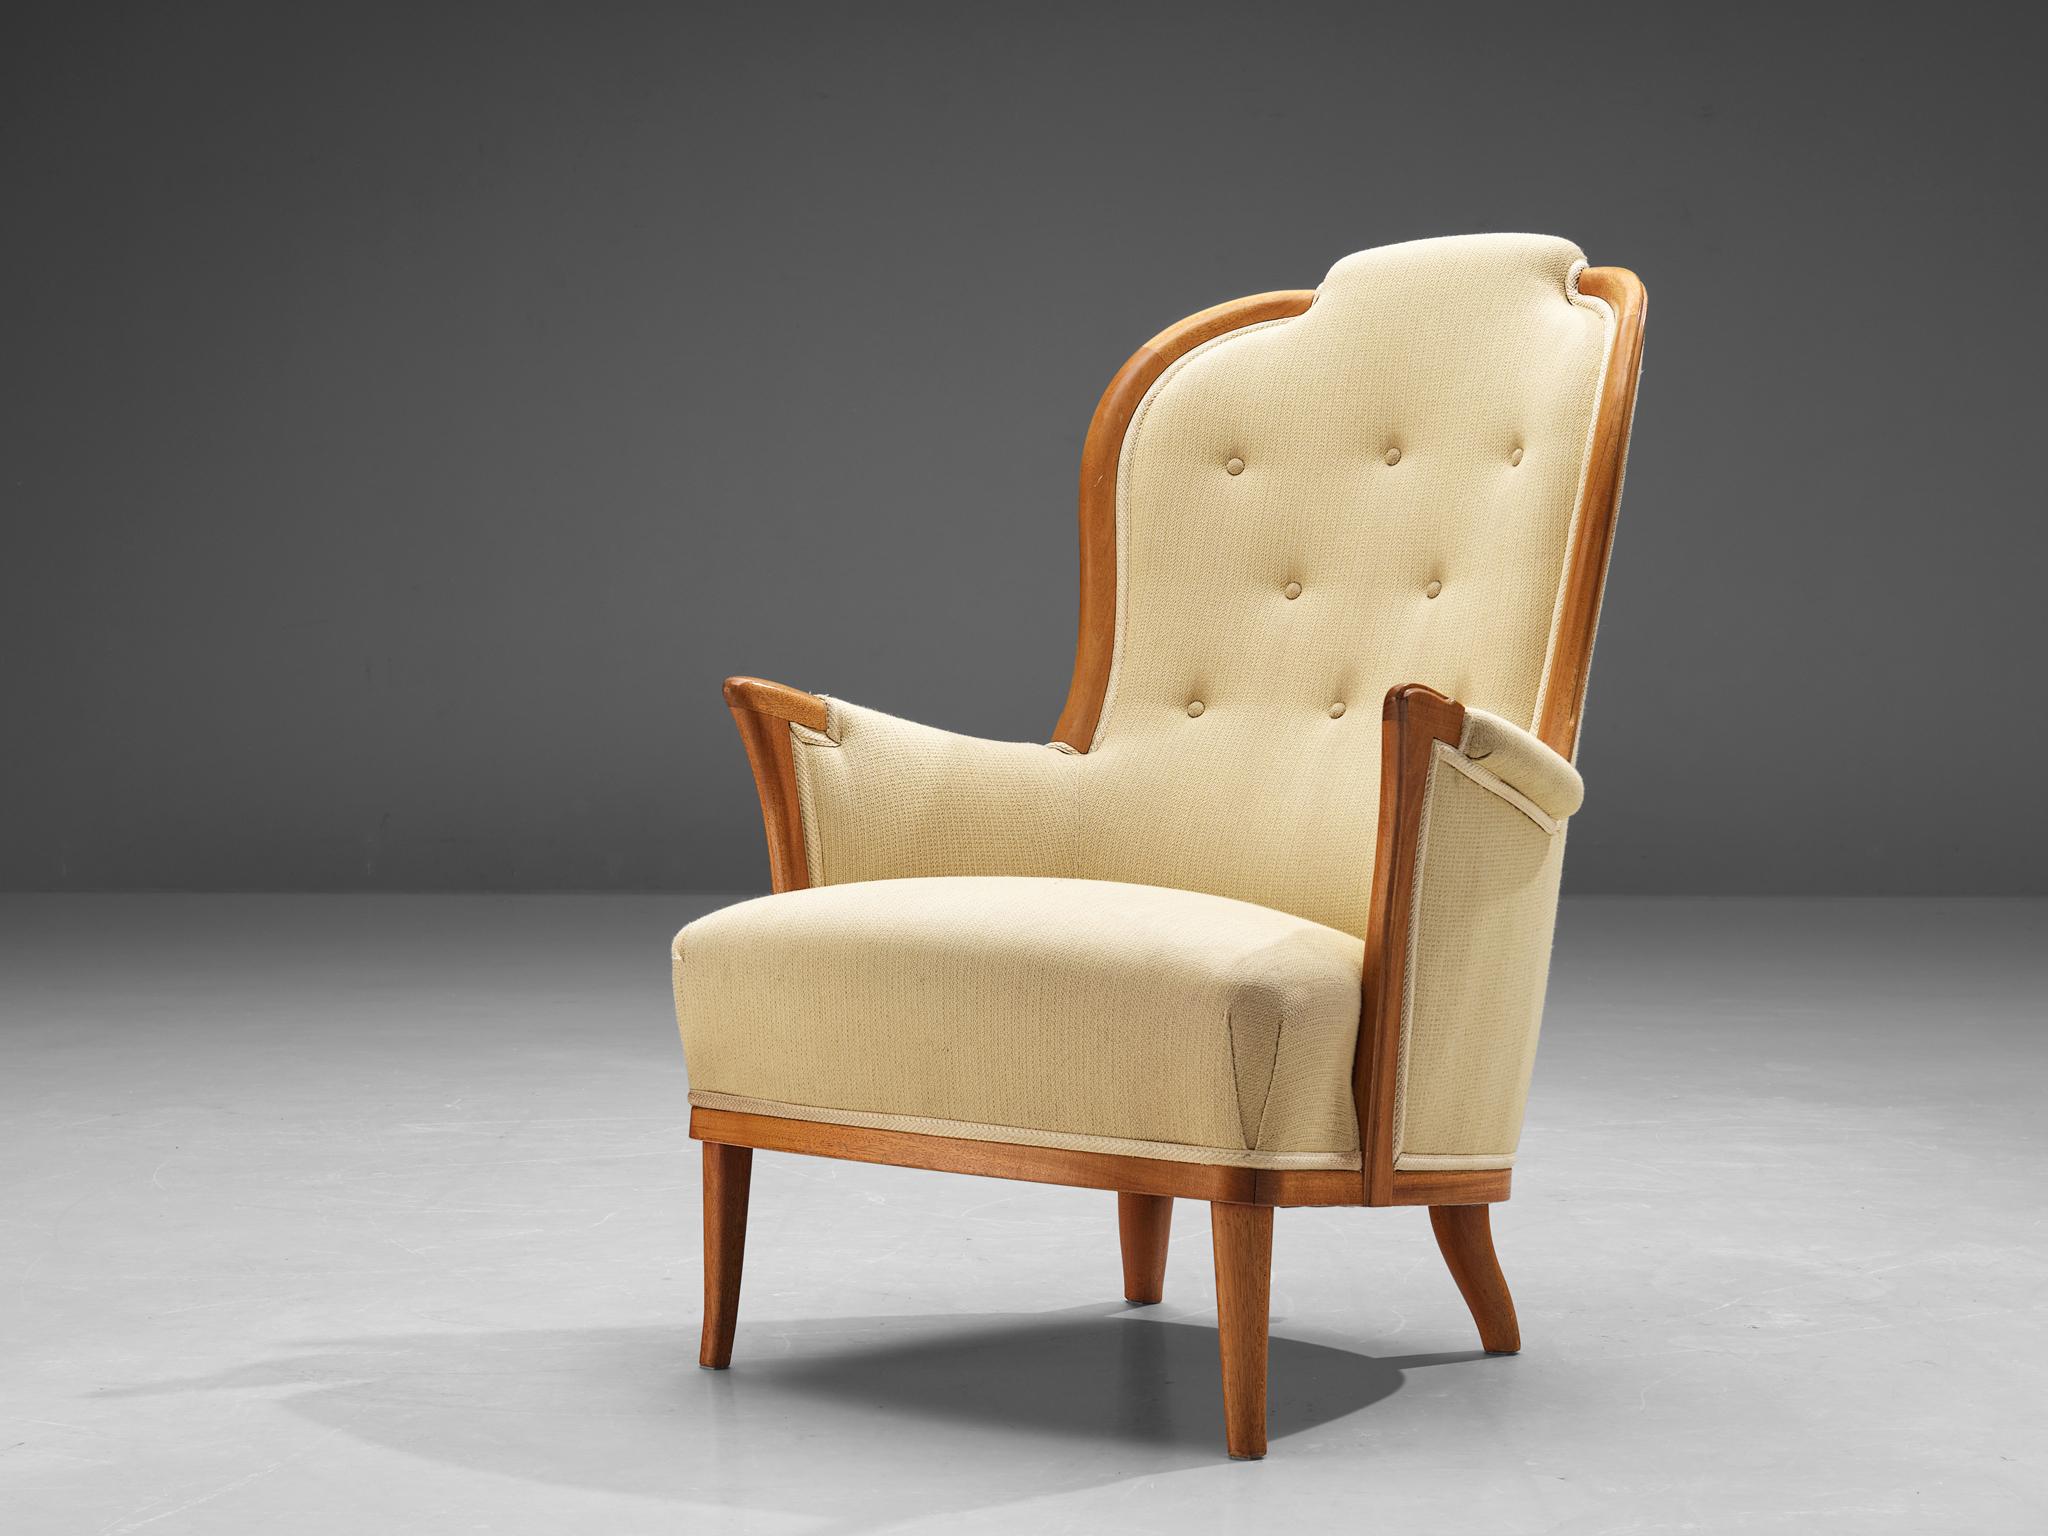 Carl Malmsten for O.H. Sjögren, 'Our Lady' easy chair, teak, fabric, Sweden, 1950s. 

Very interesting Swedish lounge chair by Carl Malmsten in a yellow fabric with tufted back. The distinctive lines and graceful curves of its design create a